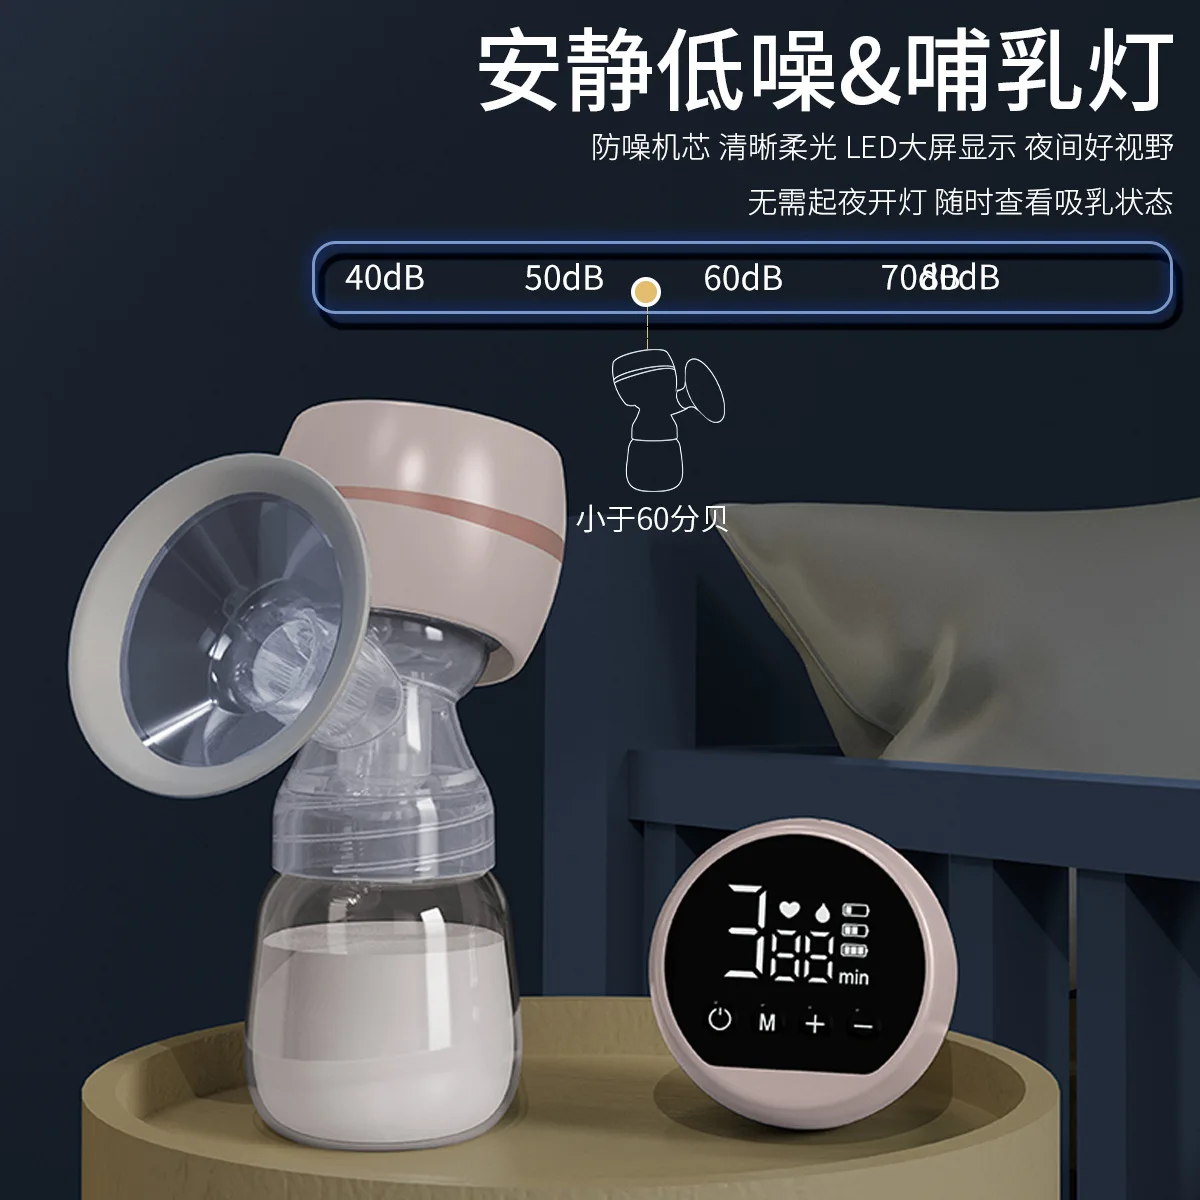 Zhibao electric breast pump intelligent integrated automatic large suction milking device massage silicone breast pump enlarge